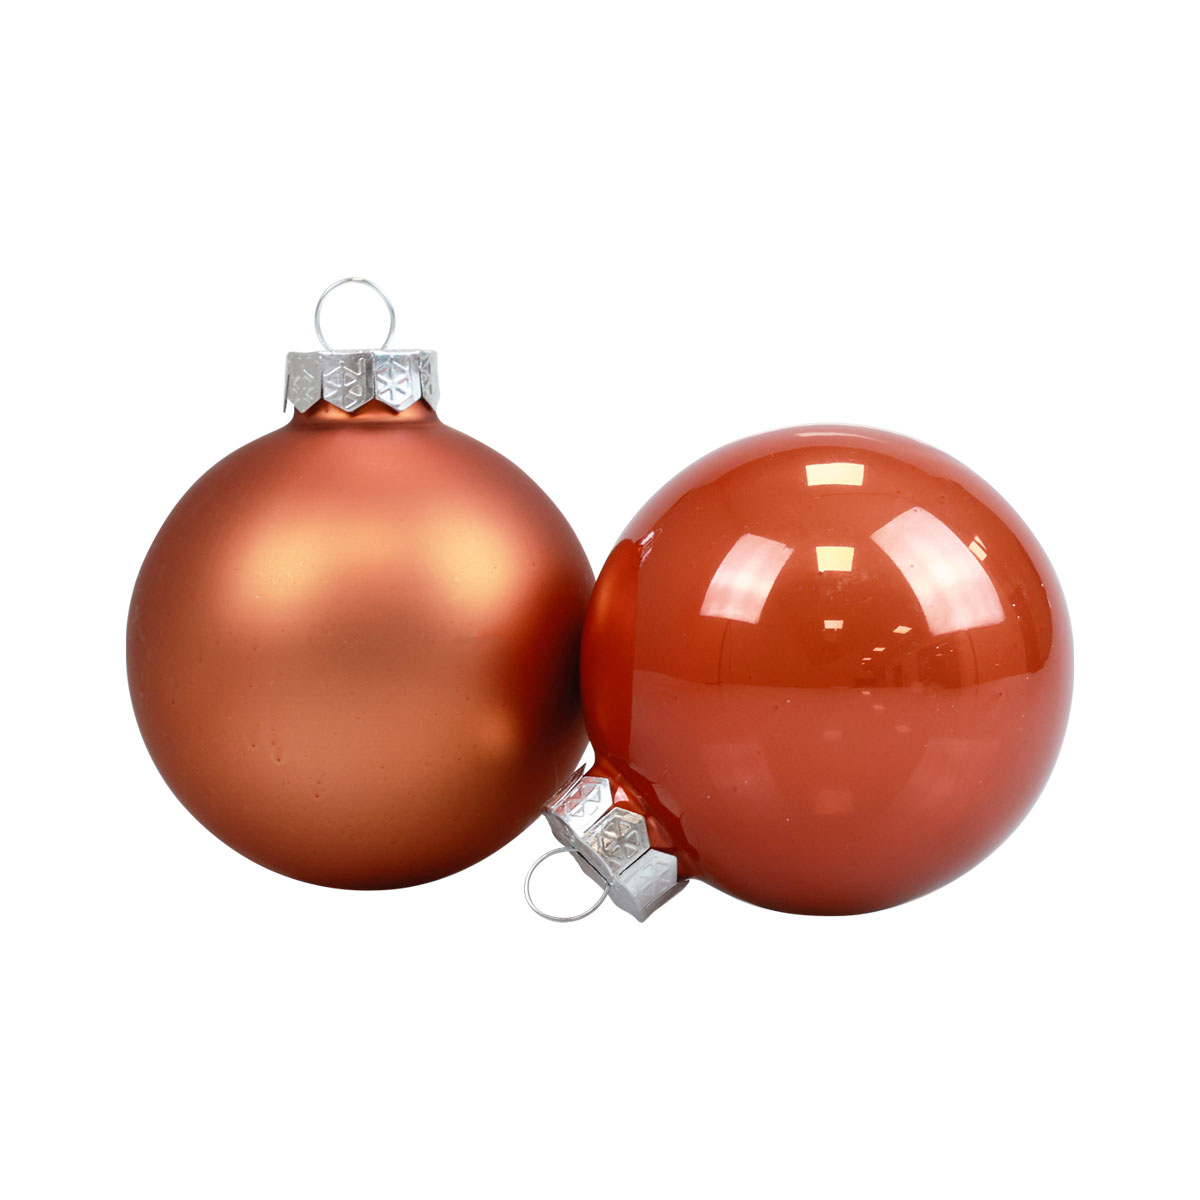 20 Pack Clear Plastic Ornaments 5cm Christmas Ornament Balls for